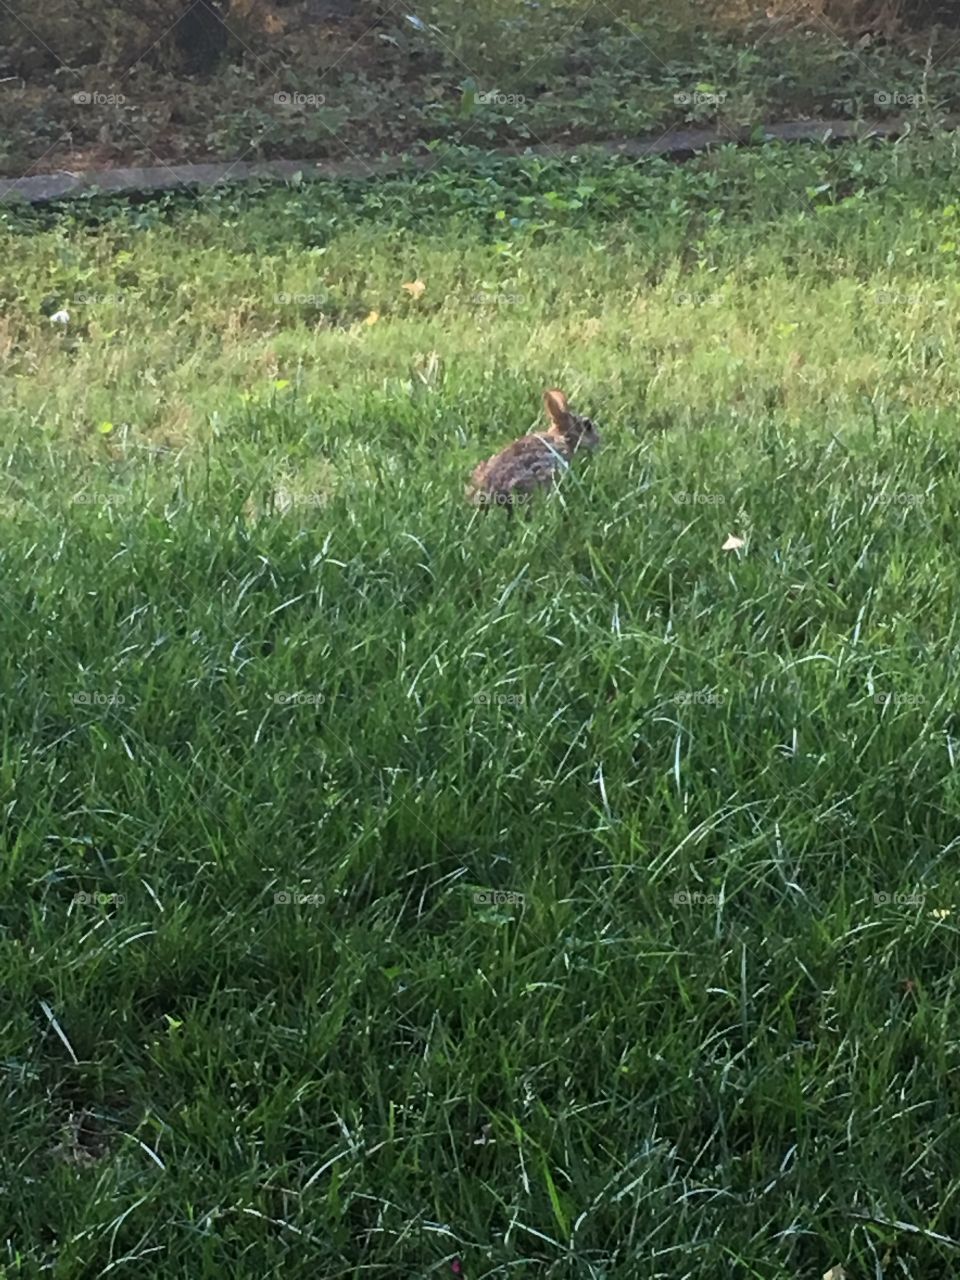 A small rabbit in high grass.